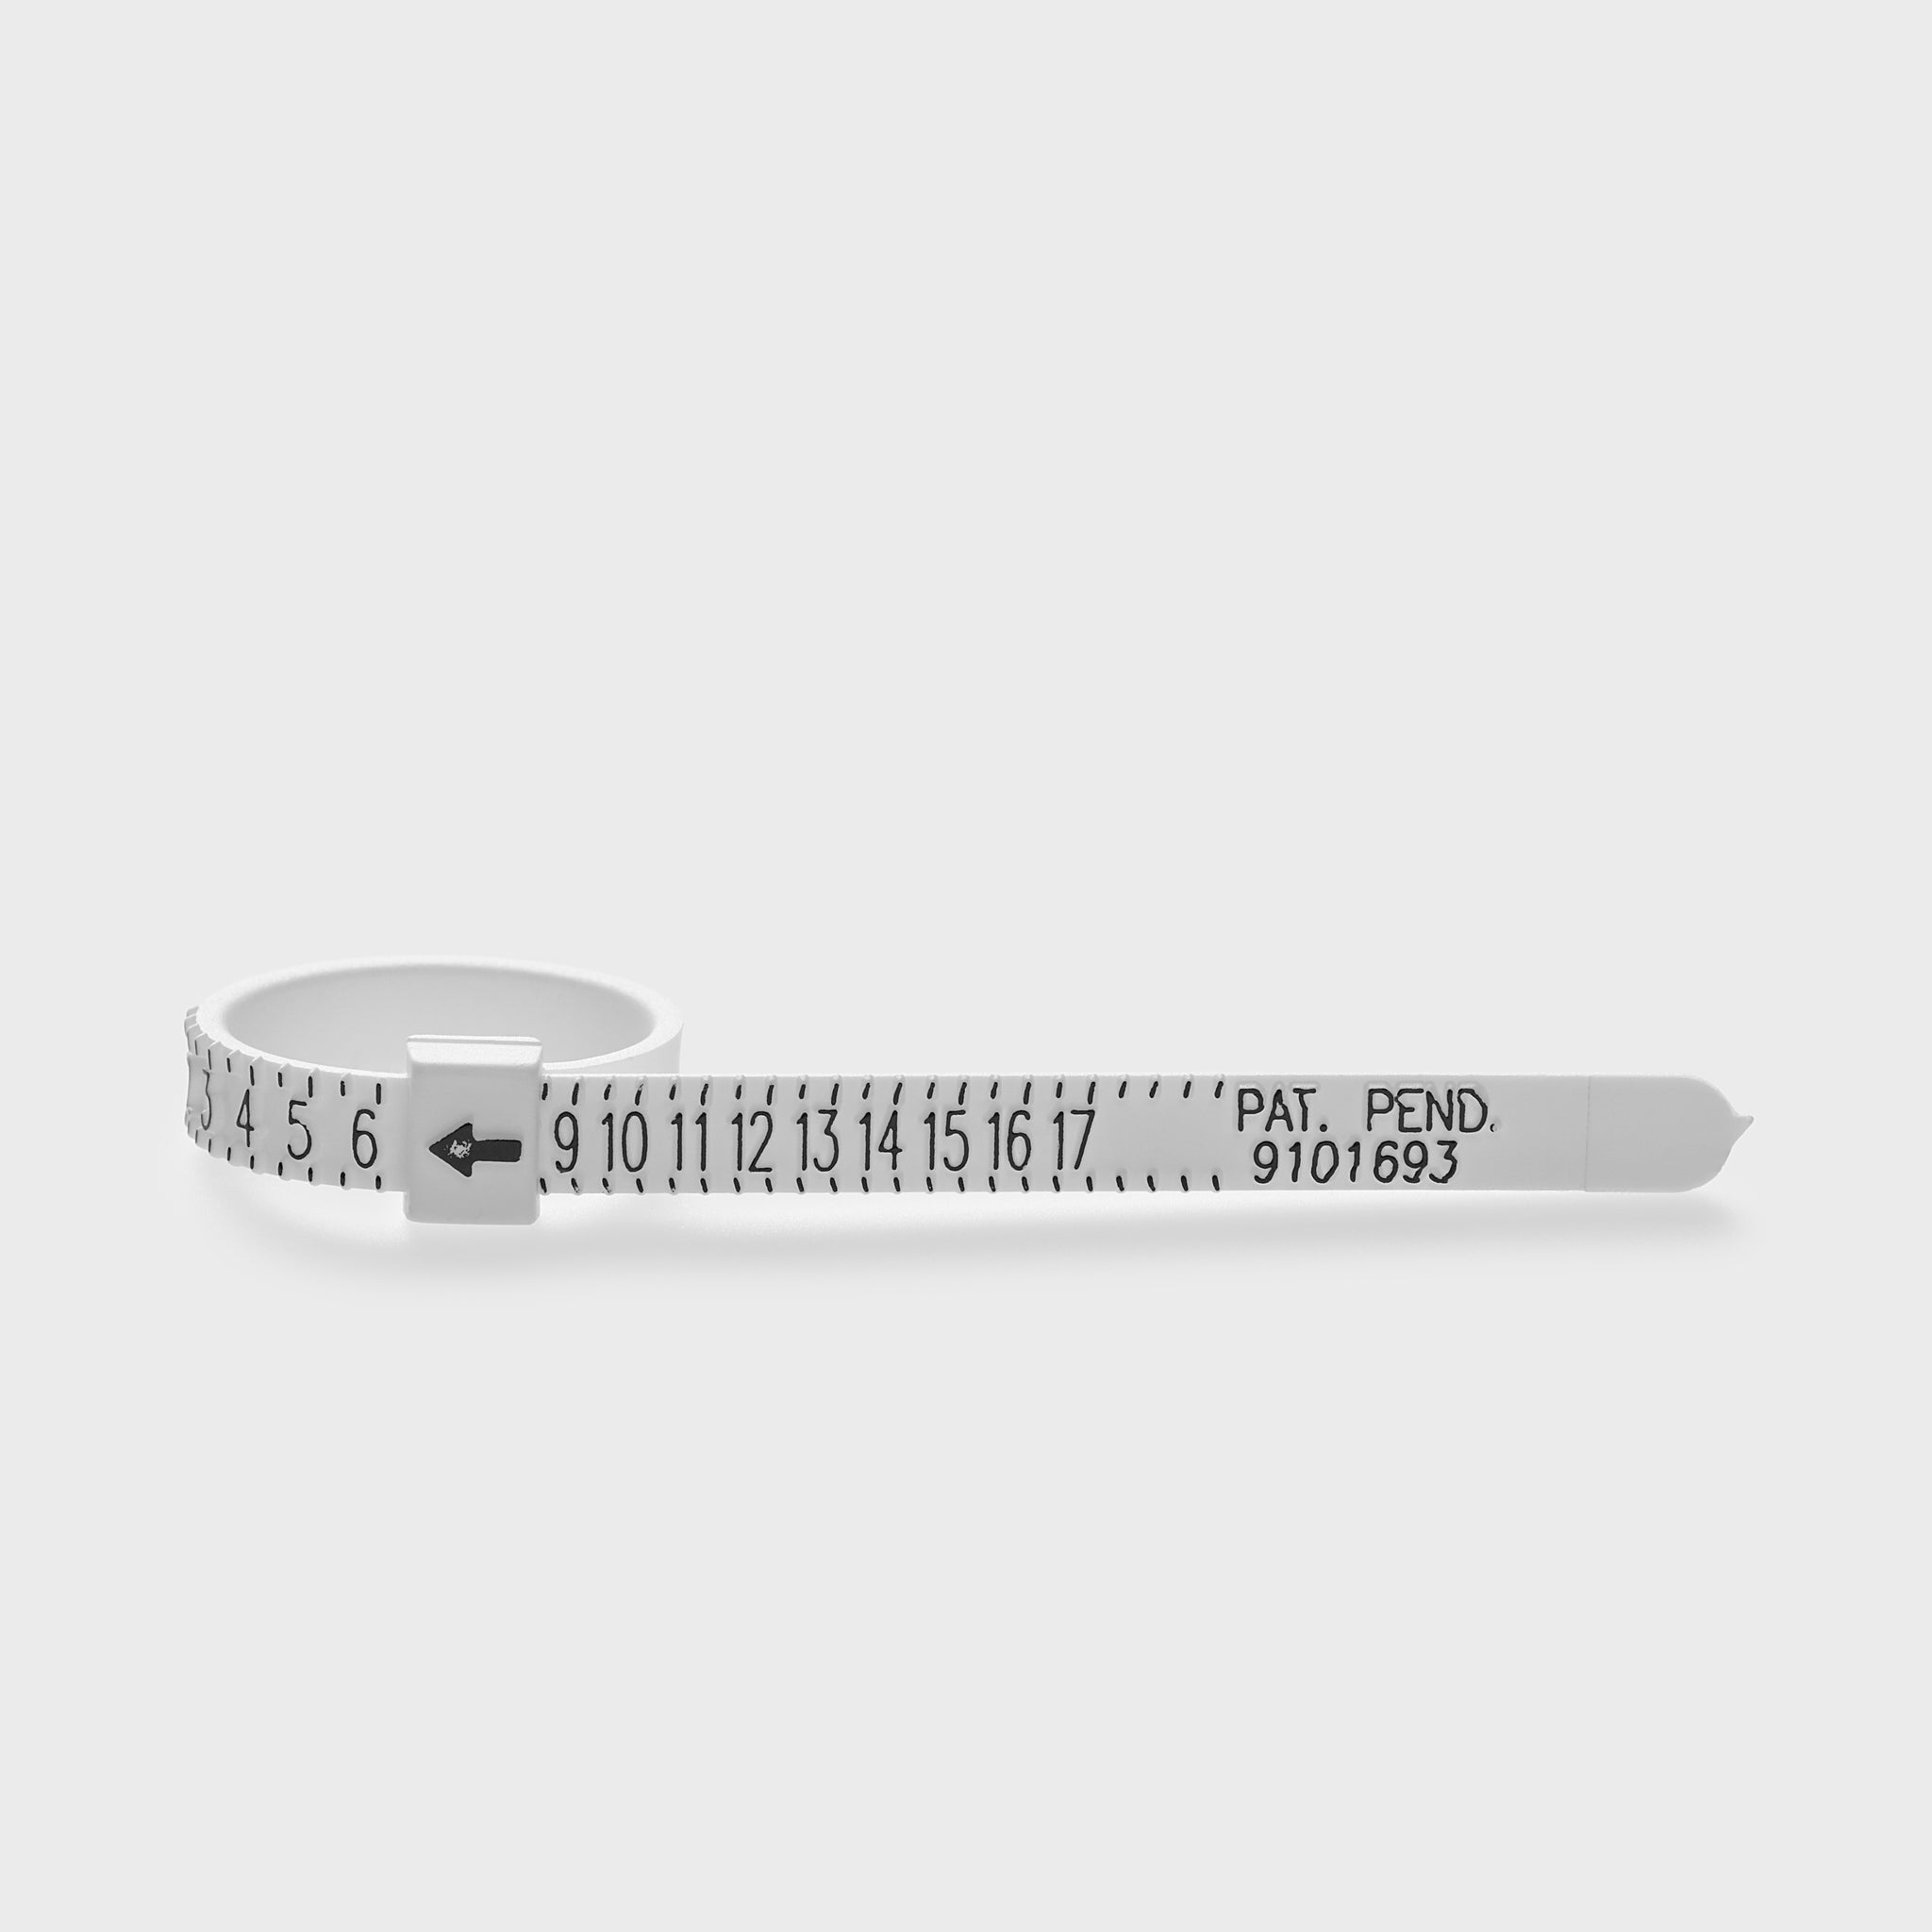 Ring Size Guide & Chart: How To Measure Your Ring Size | Bulgari